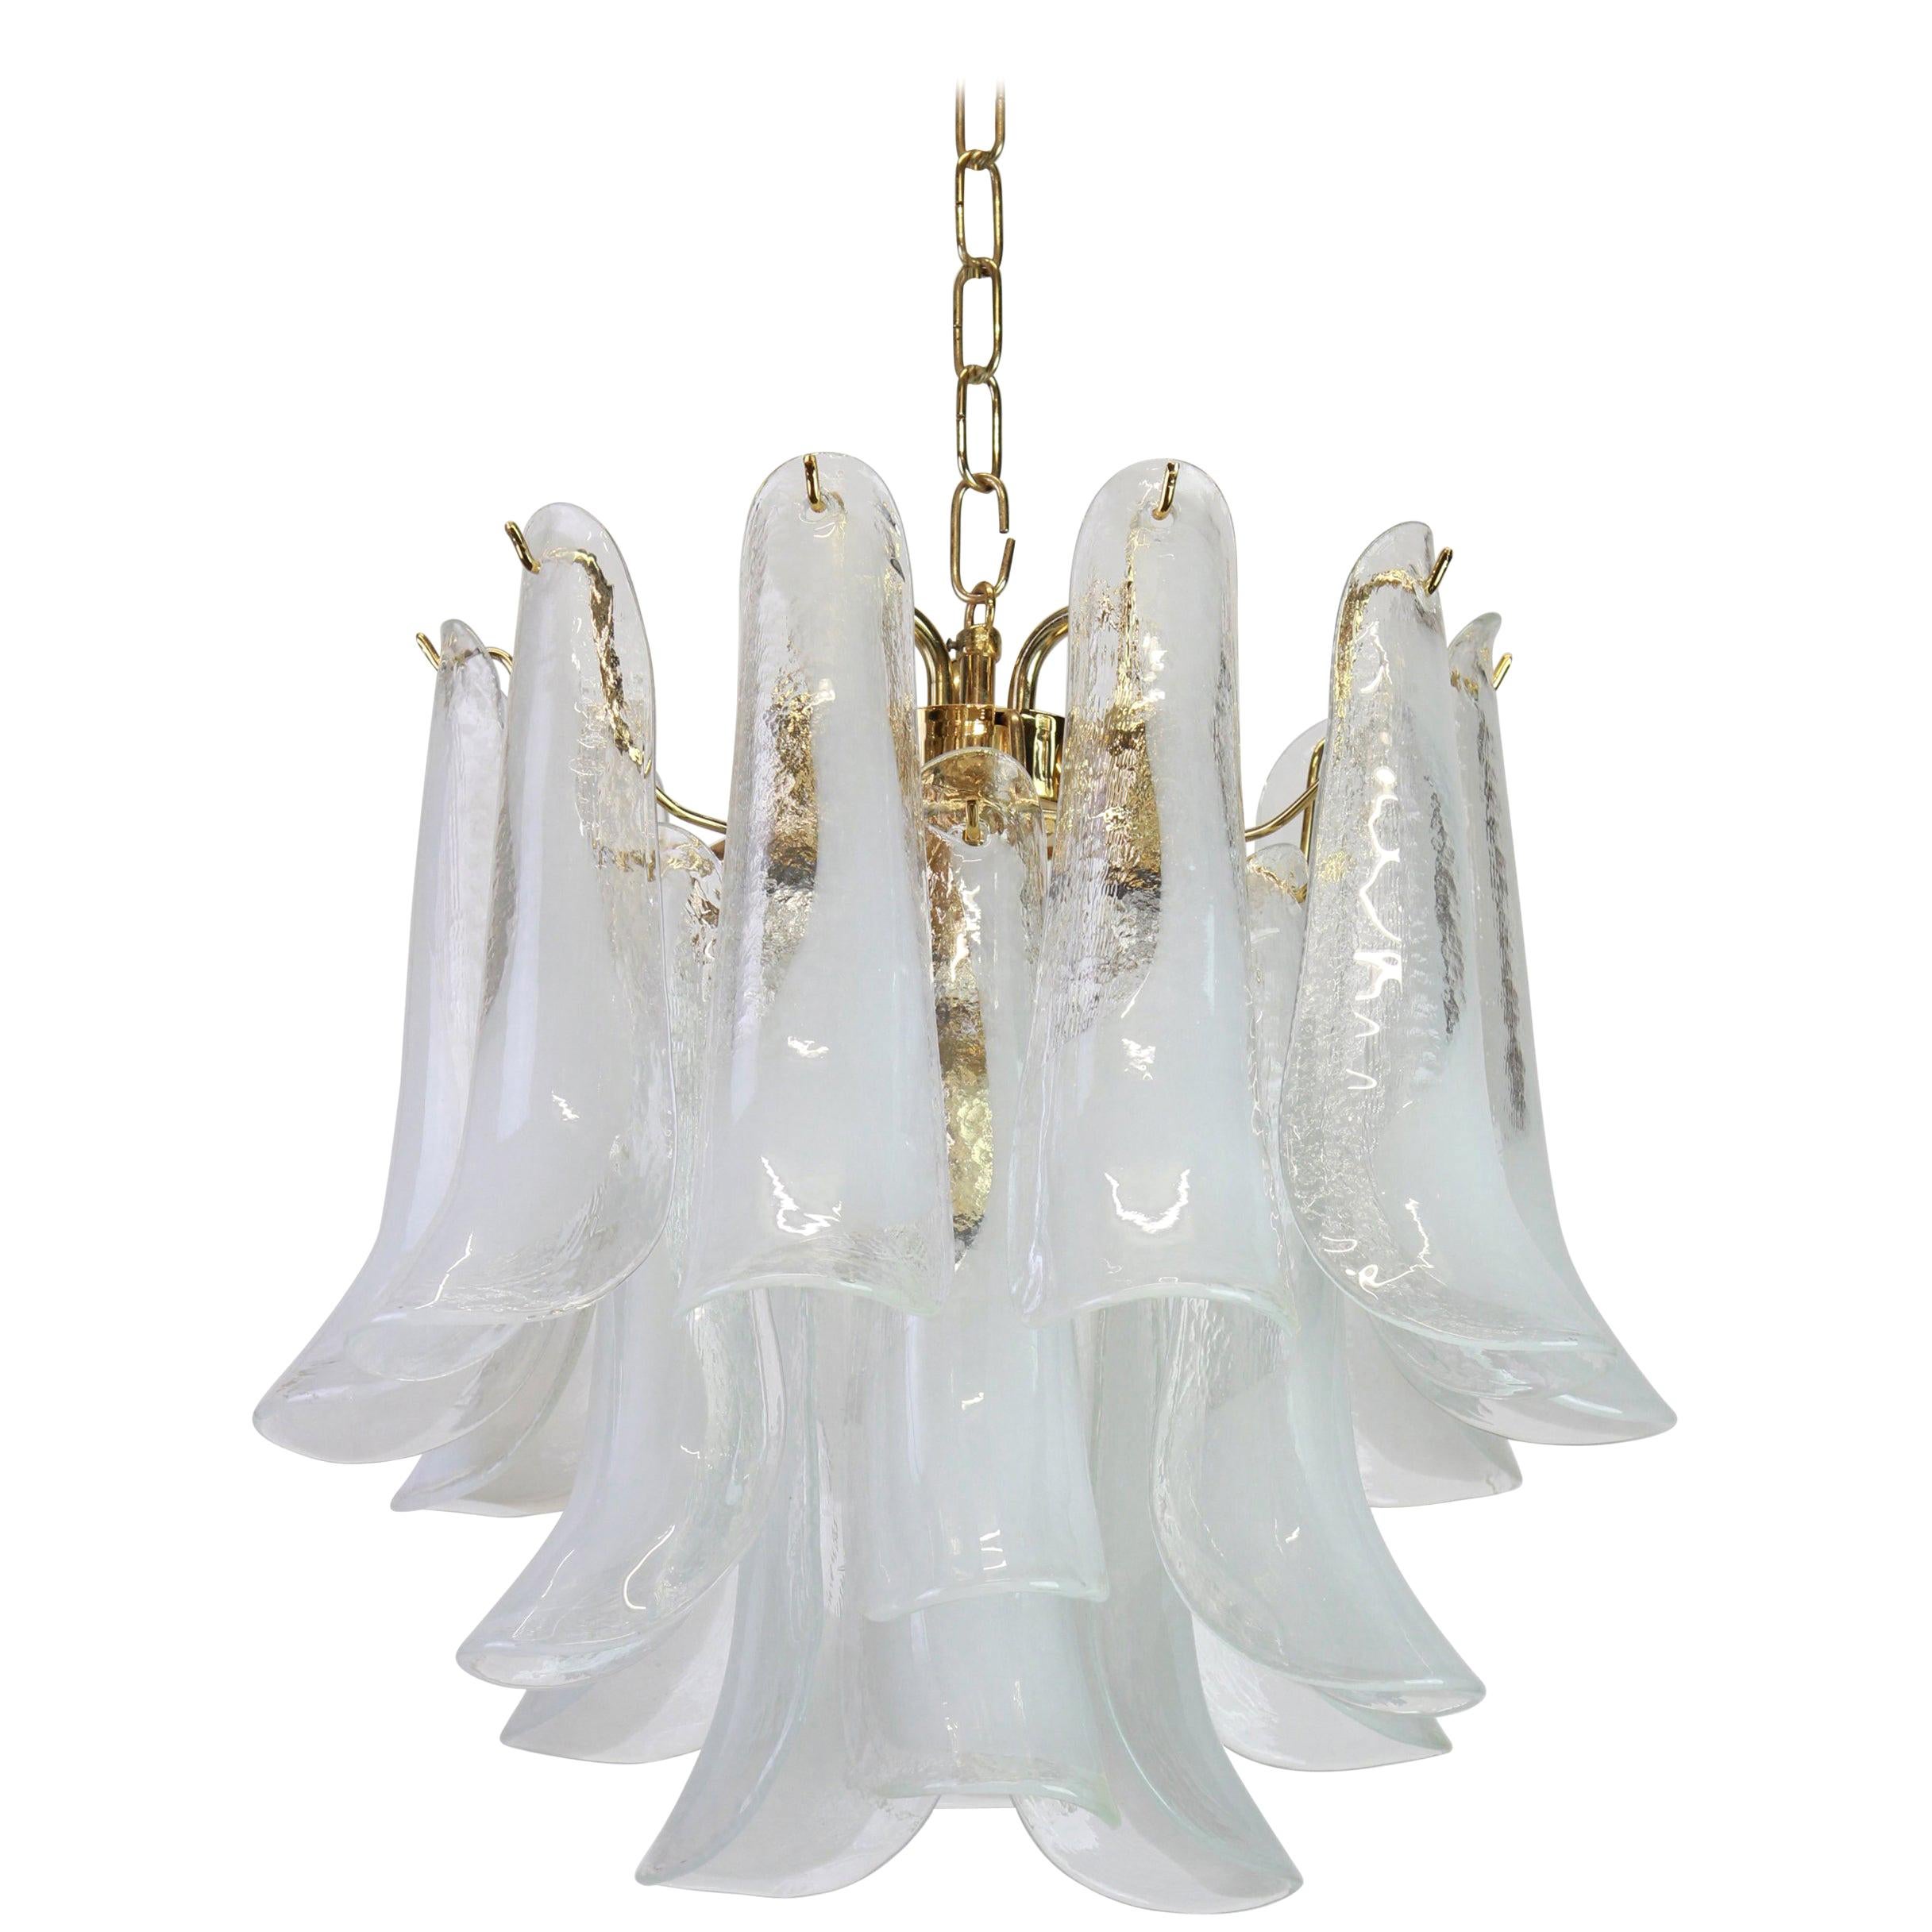 A stunning Murano glass chandelier designed by Carlo Nason for Mazzega, Italy, manufactured in the 1970s.
The chandelier is composed of 19 thick textured glass elements attached to a brass metal frame.

High quality, very good condition. Cleaned,